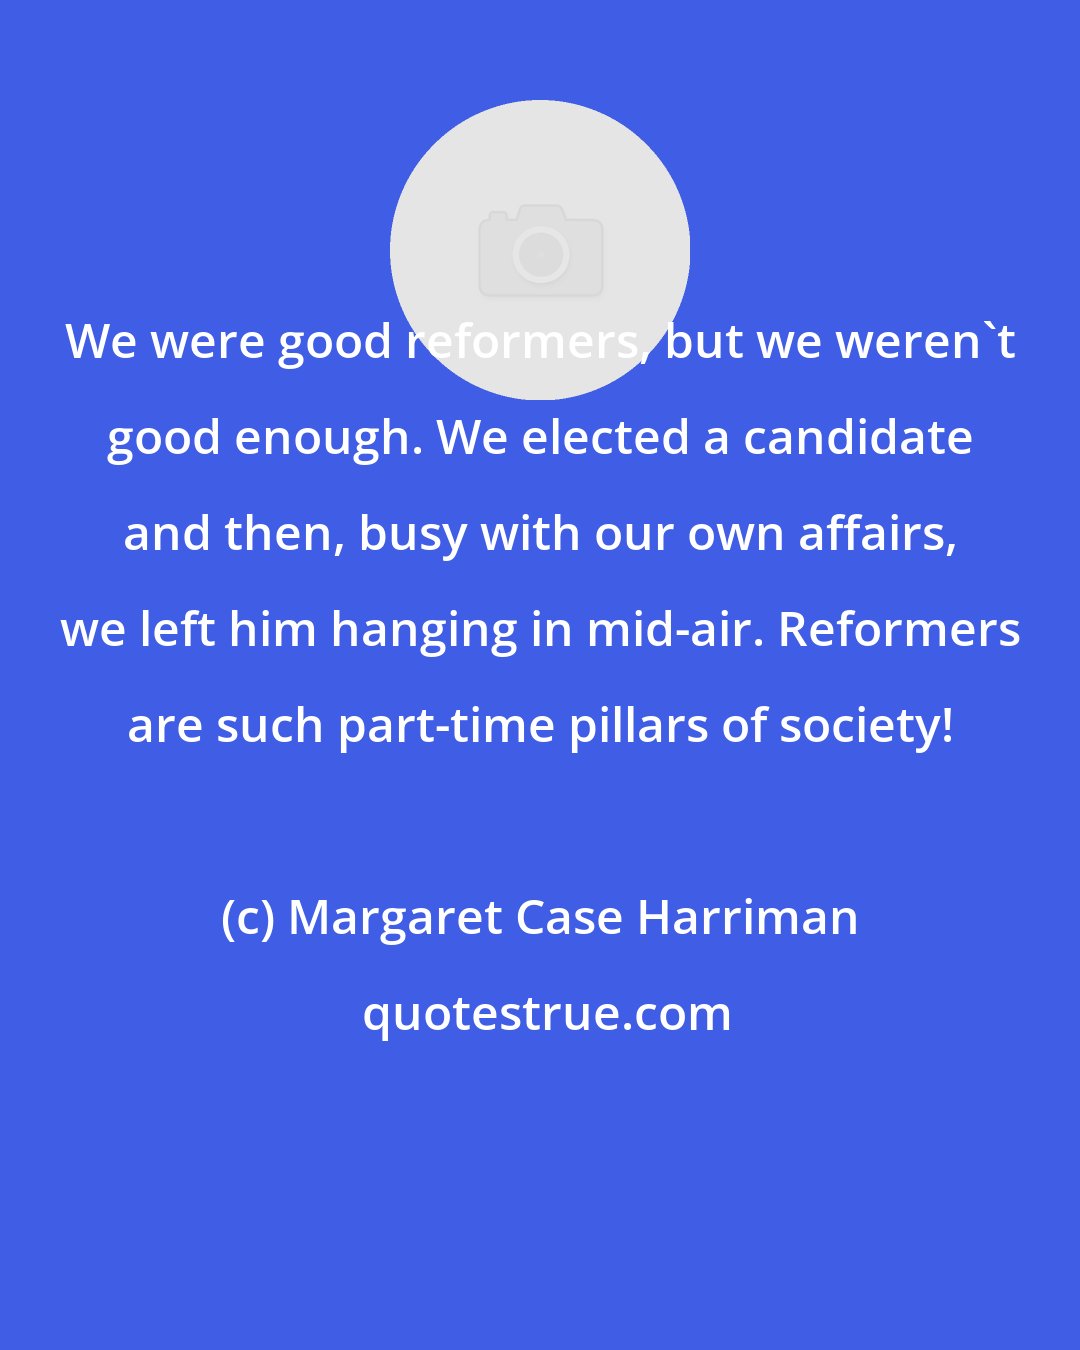 Margaret Case Harriman: We were good reformers, but we weren't good enough. We elected a candidate and then, busy with our own affairs, we left him hanging in mid-air. Reformers are such part-time pillars of society!